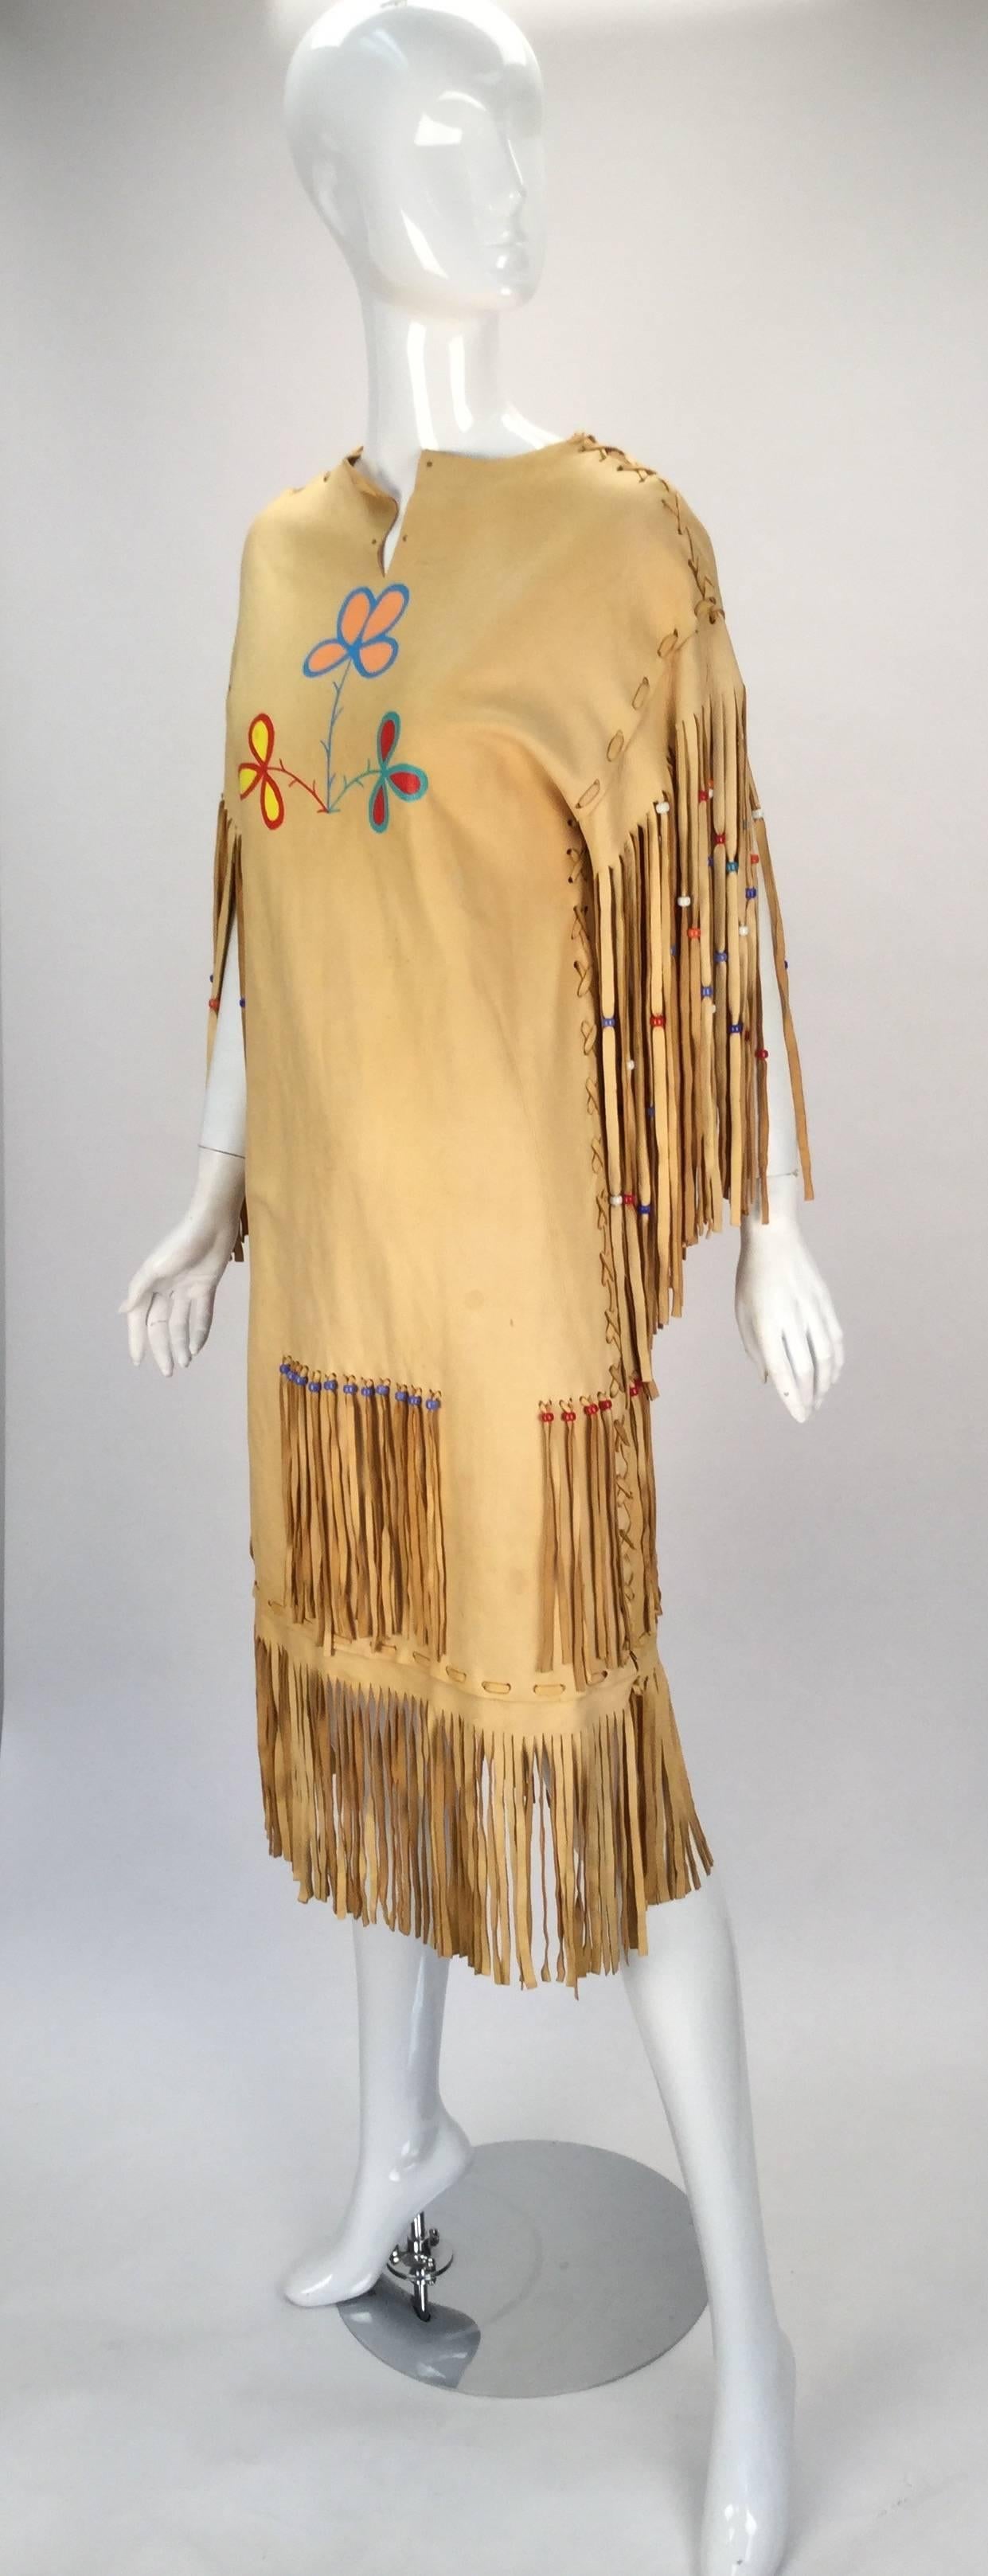 1970s Native American Style Leather Handmade/painted Fringe Dress 1